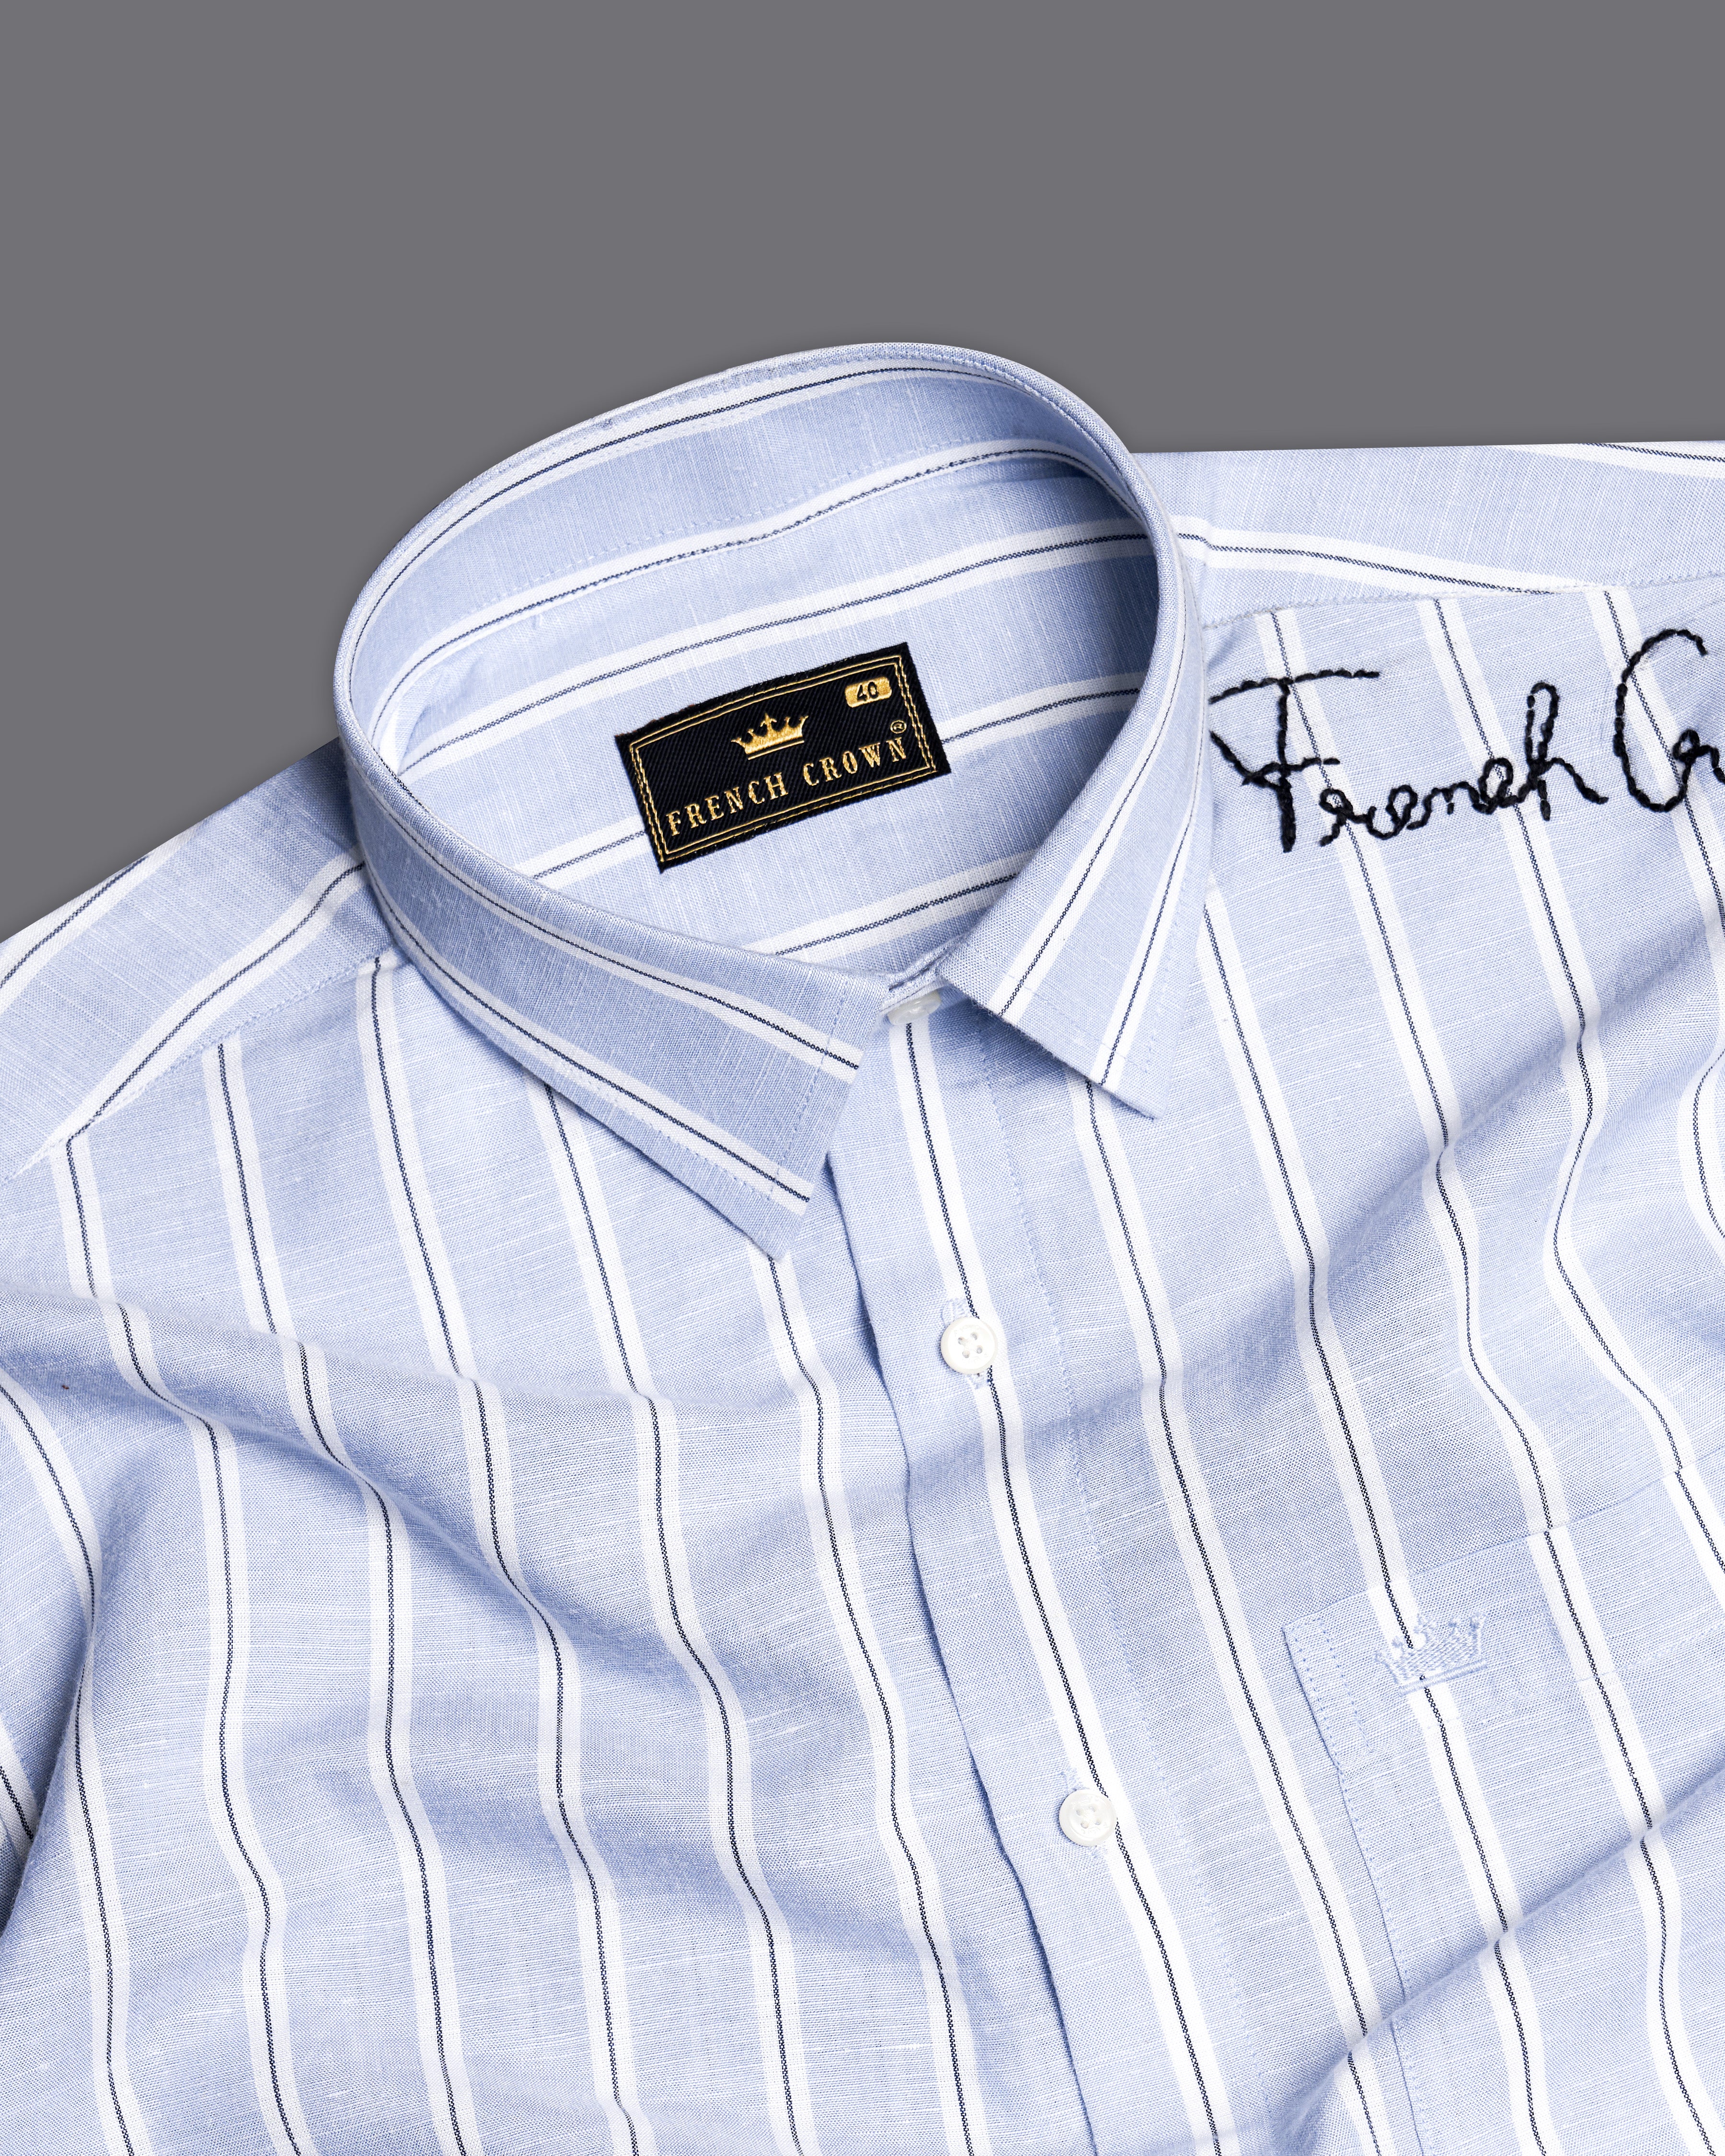 Periwinkle Blue and White Striped Luxurious Linen Hand Embroidered Signature Designer Shirt 7572-EH084-38, 7572-EH084-H-38, 7572-EH084-39, 7572-EH084-H-39, 7572-EH084-40, 7572-EH084-H-40, 7572-EH084-42, 7572-EH084-H-42, 7572-EH084-44, 7572-EH084-H-44, 7572-EH084-46, 7572-EH084-H-46, 7572-EH084-48, 7572-EH084-H-48, 7572-EH084-50, 7572-EH084-H-50, 7572-EH084-52, 7572-EH084-H-52